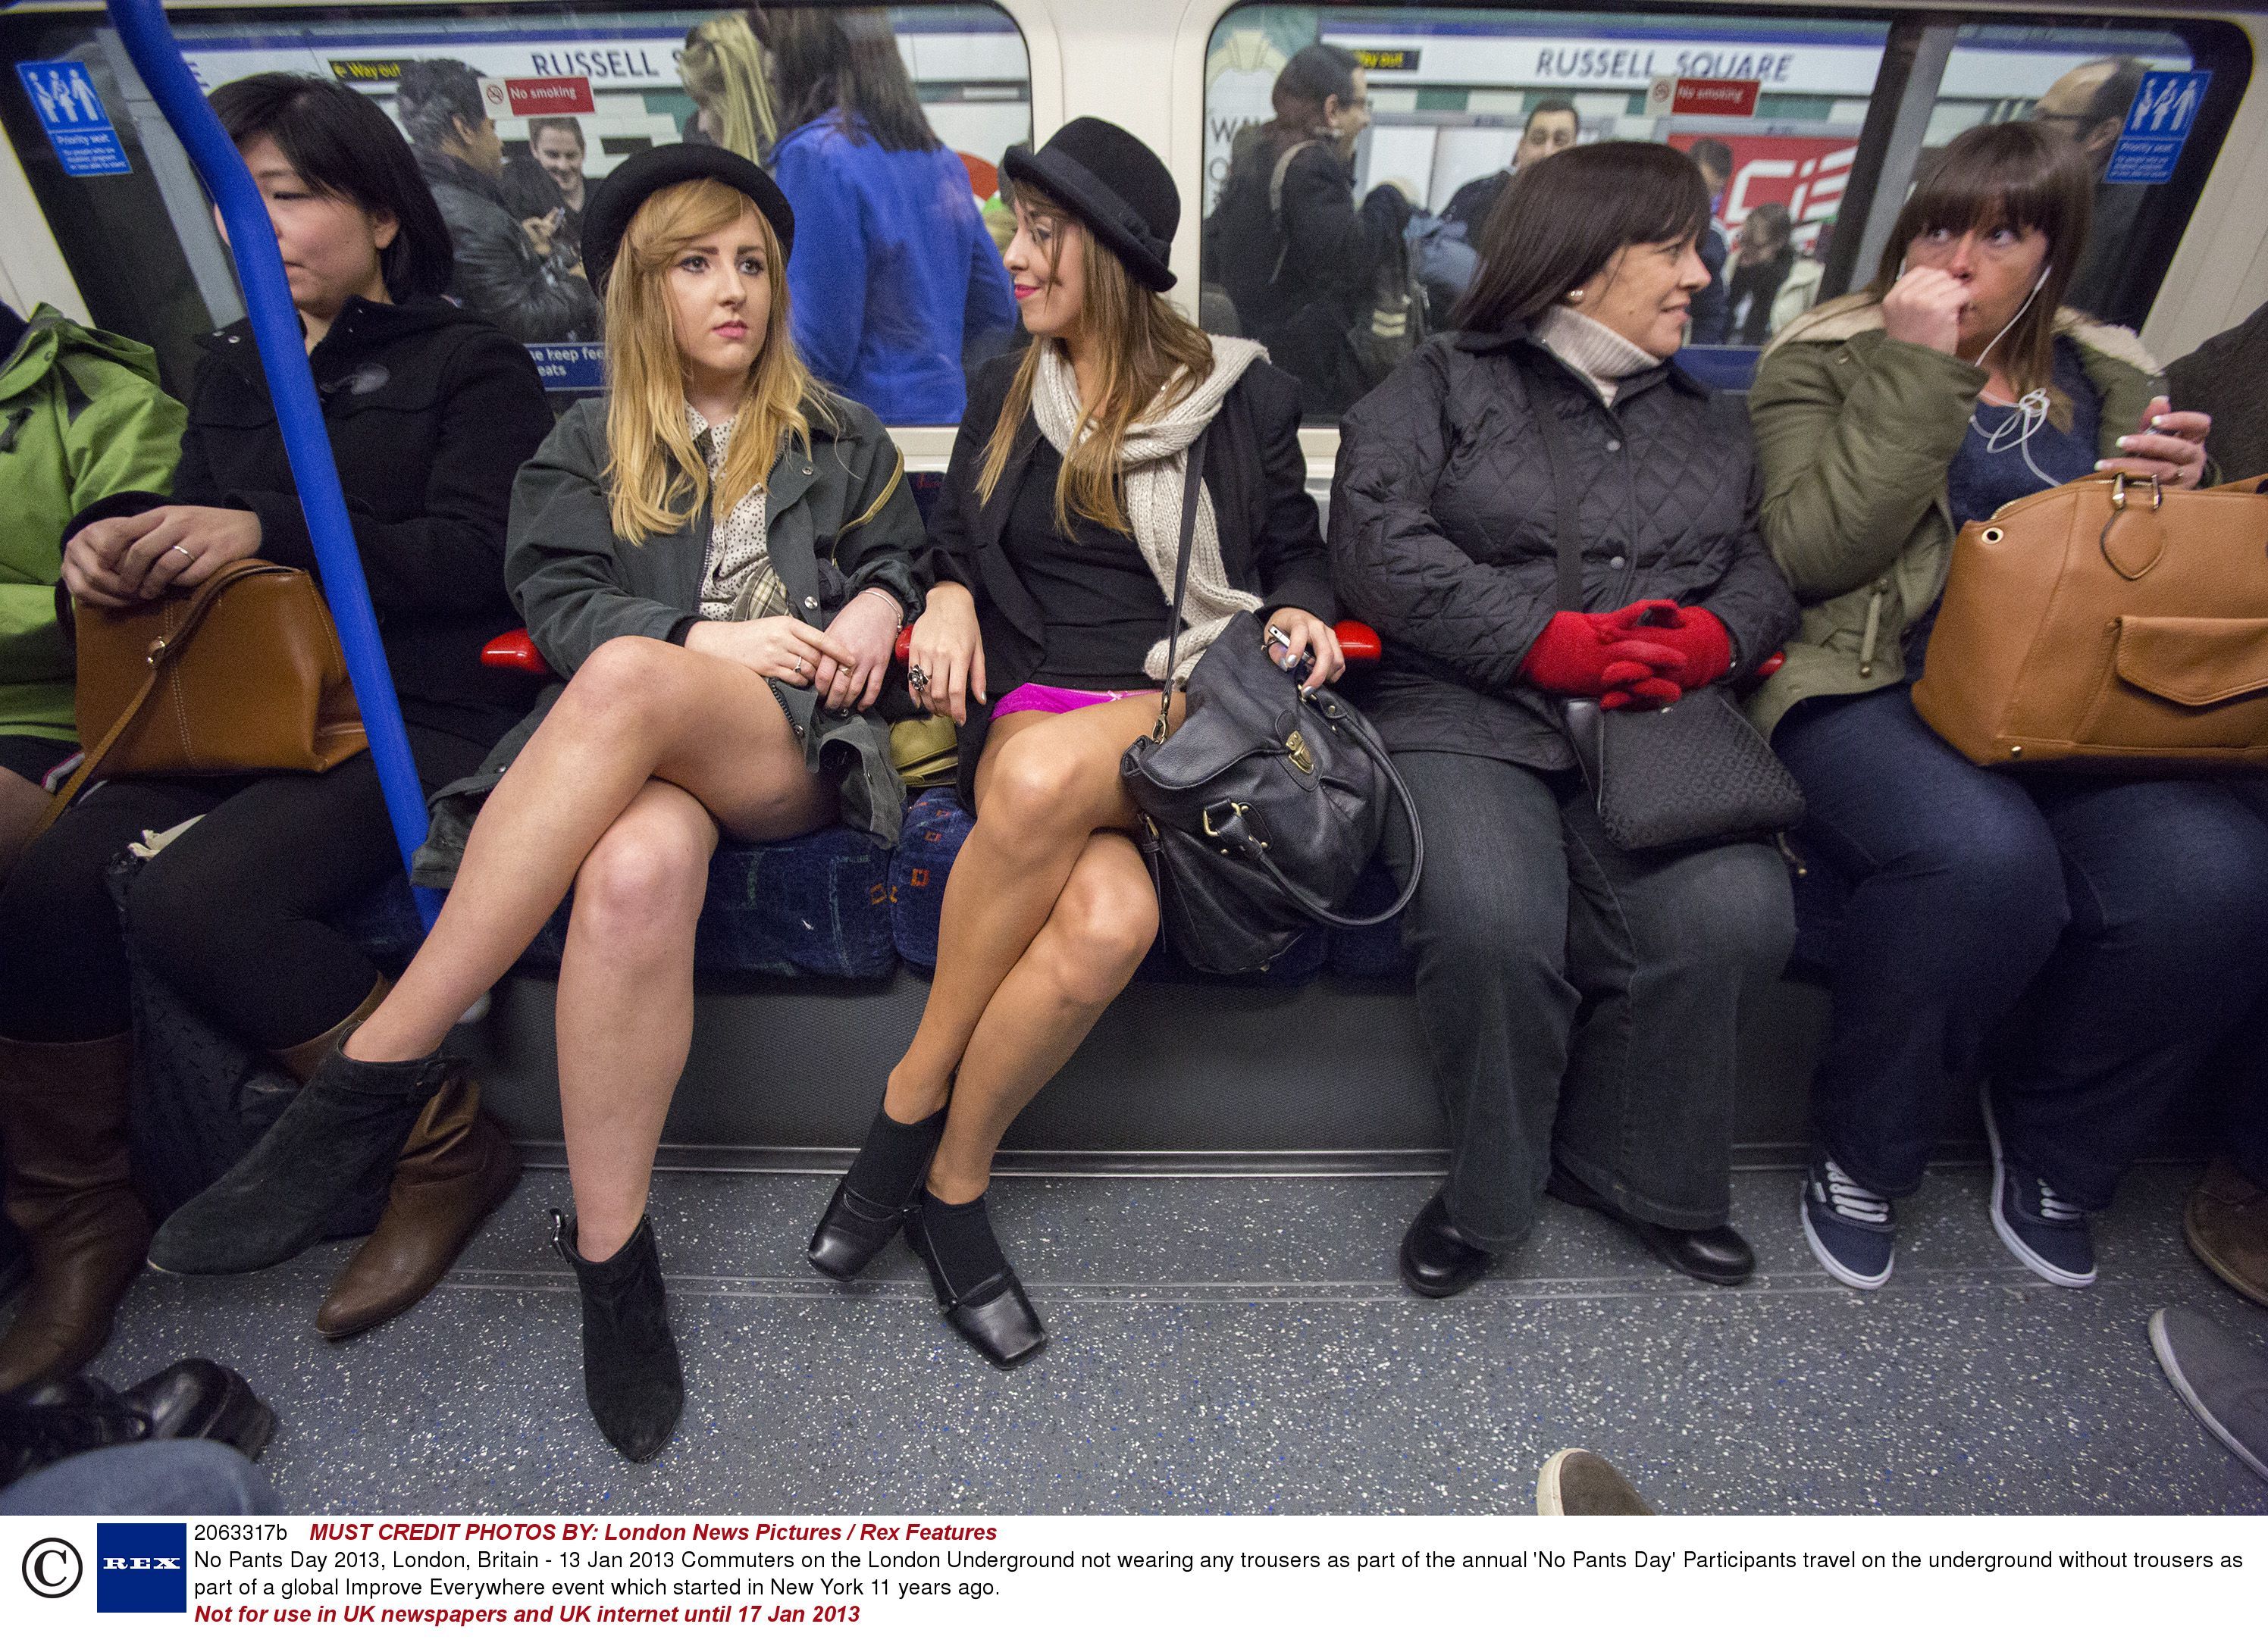 In pictures: The 13th Annual No Pants Subway Ride